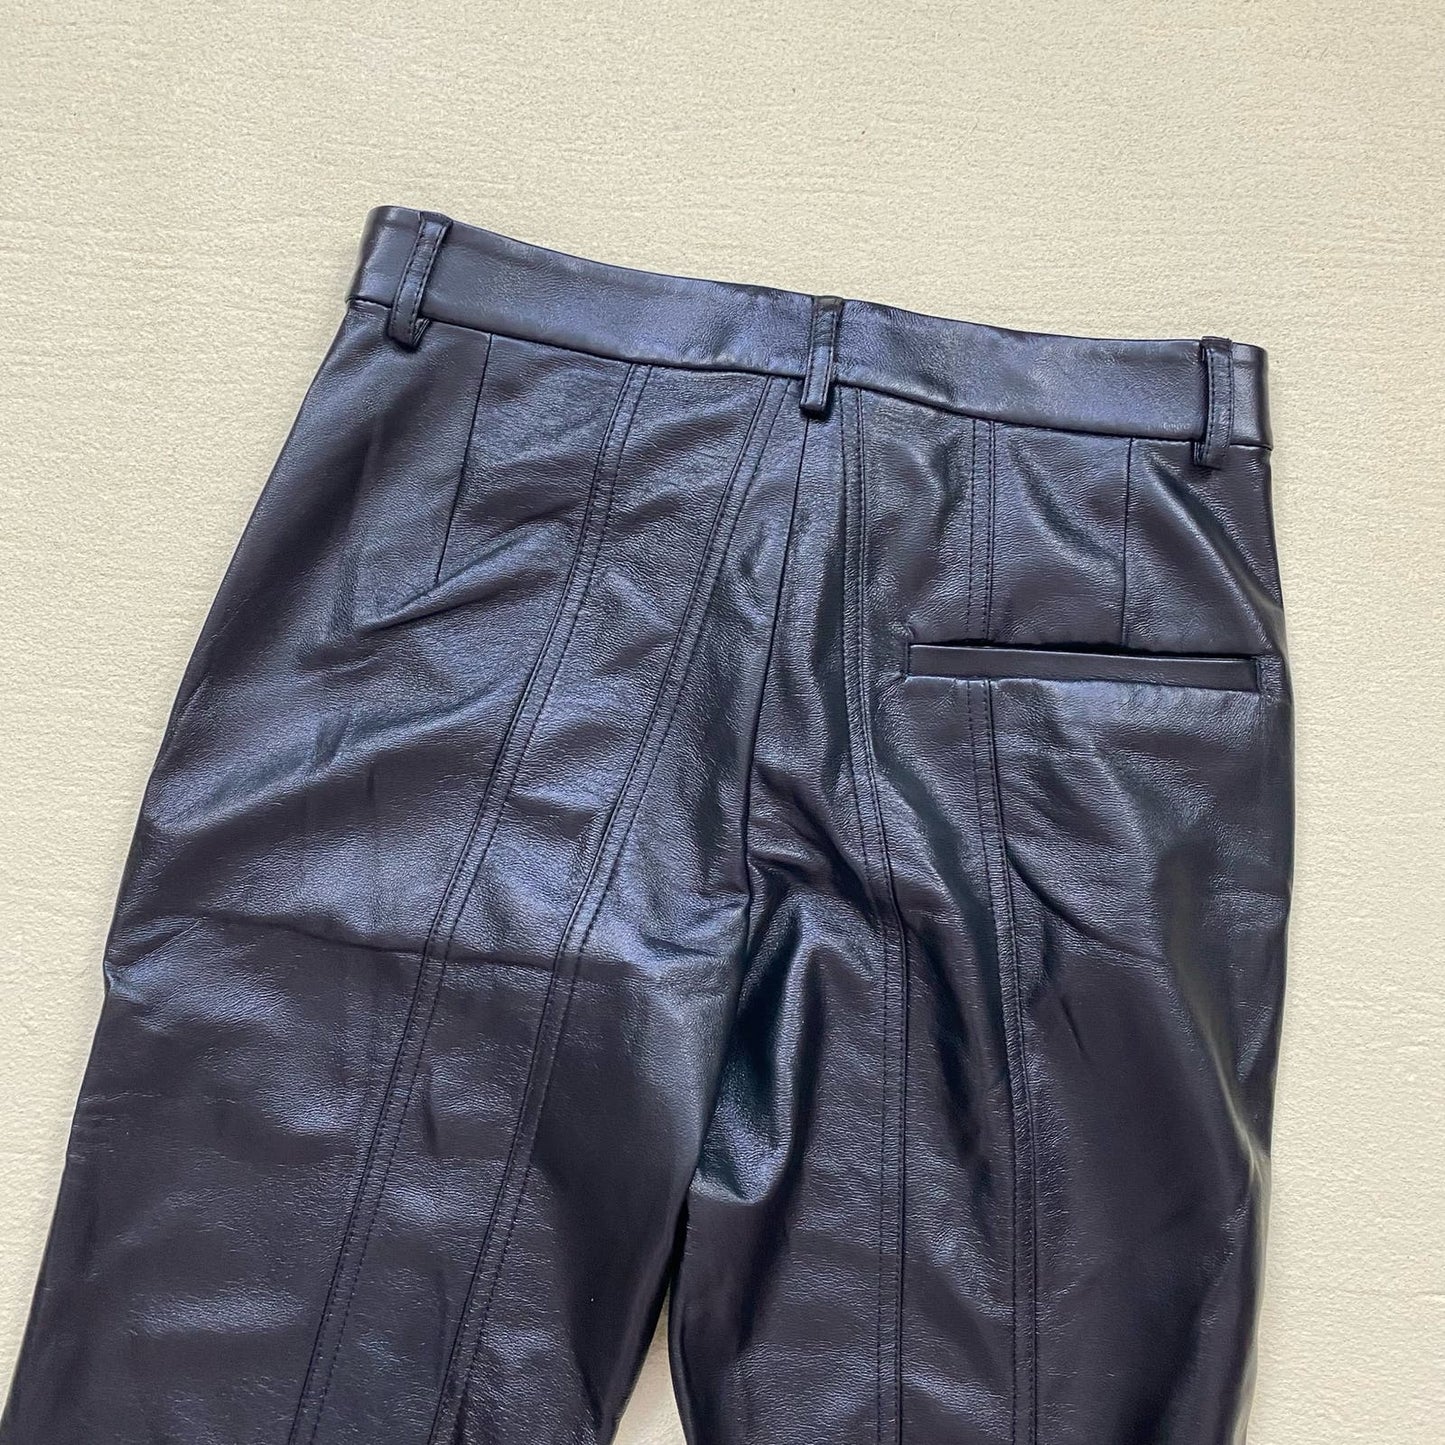 Preowned Materiel Black Vegan Leather El Stitch Flared Trousers Pants, Size XS